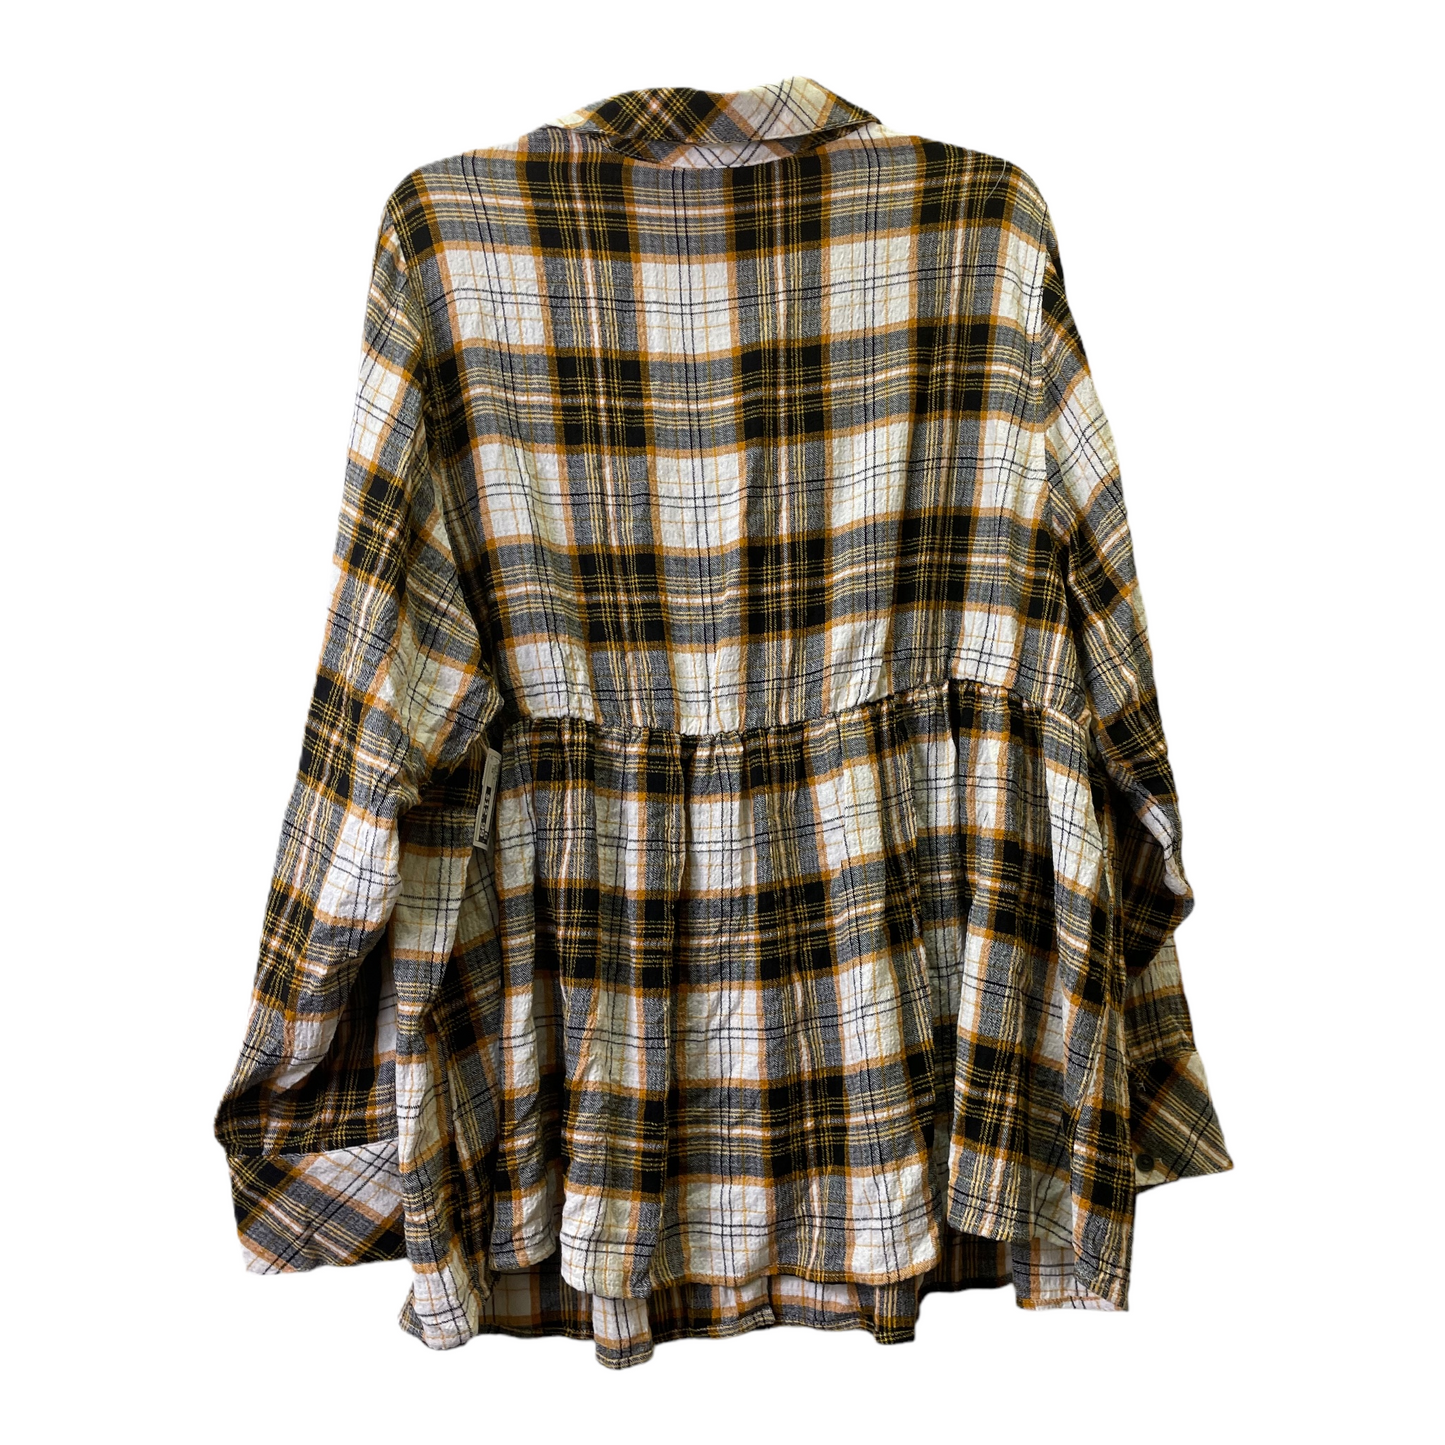 Plaid Pattern Top Long Sleeve By Torrid, Size: 3x